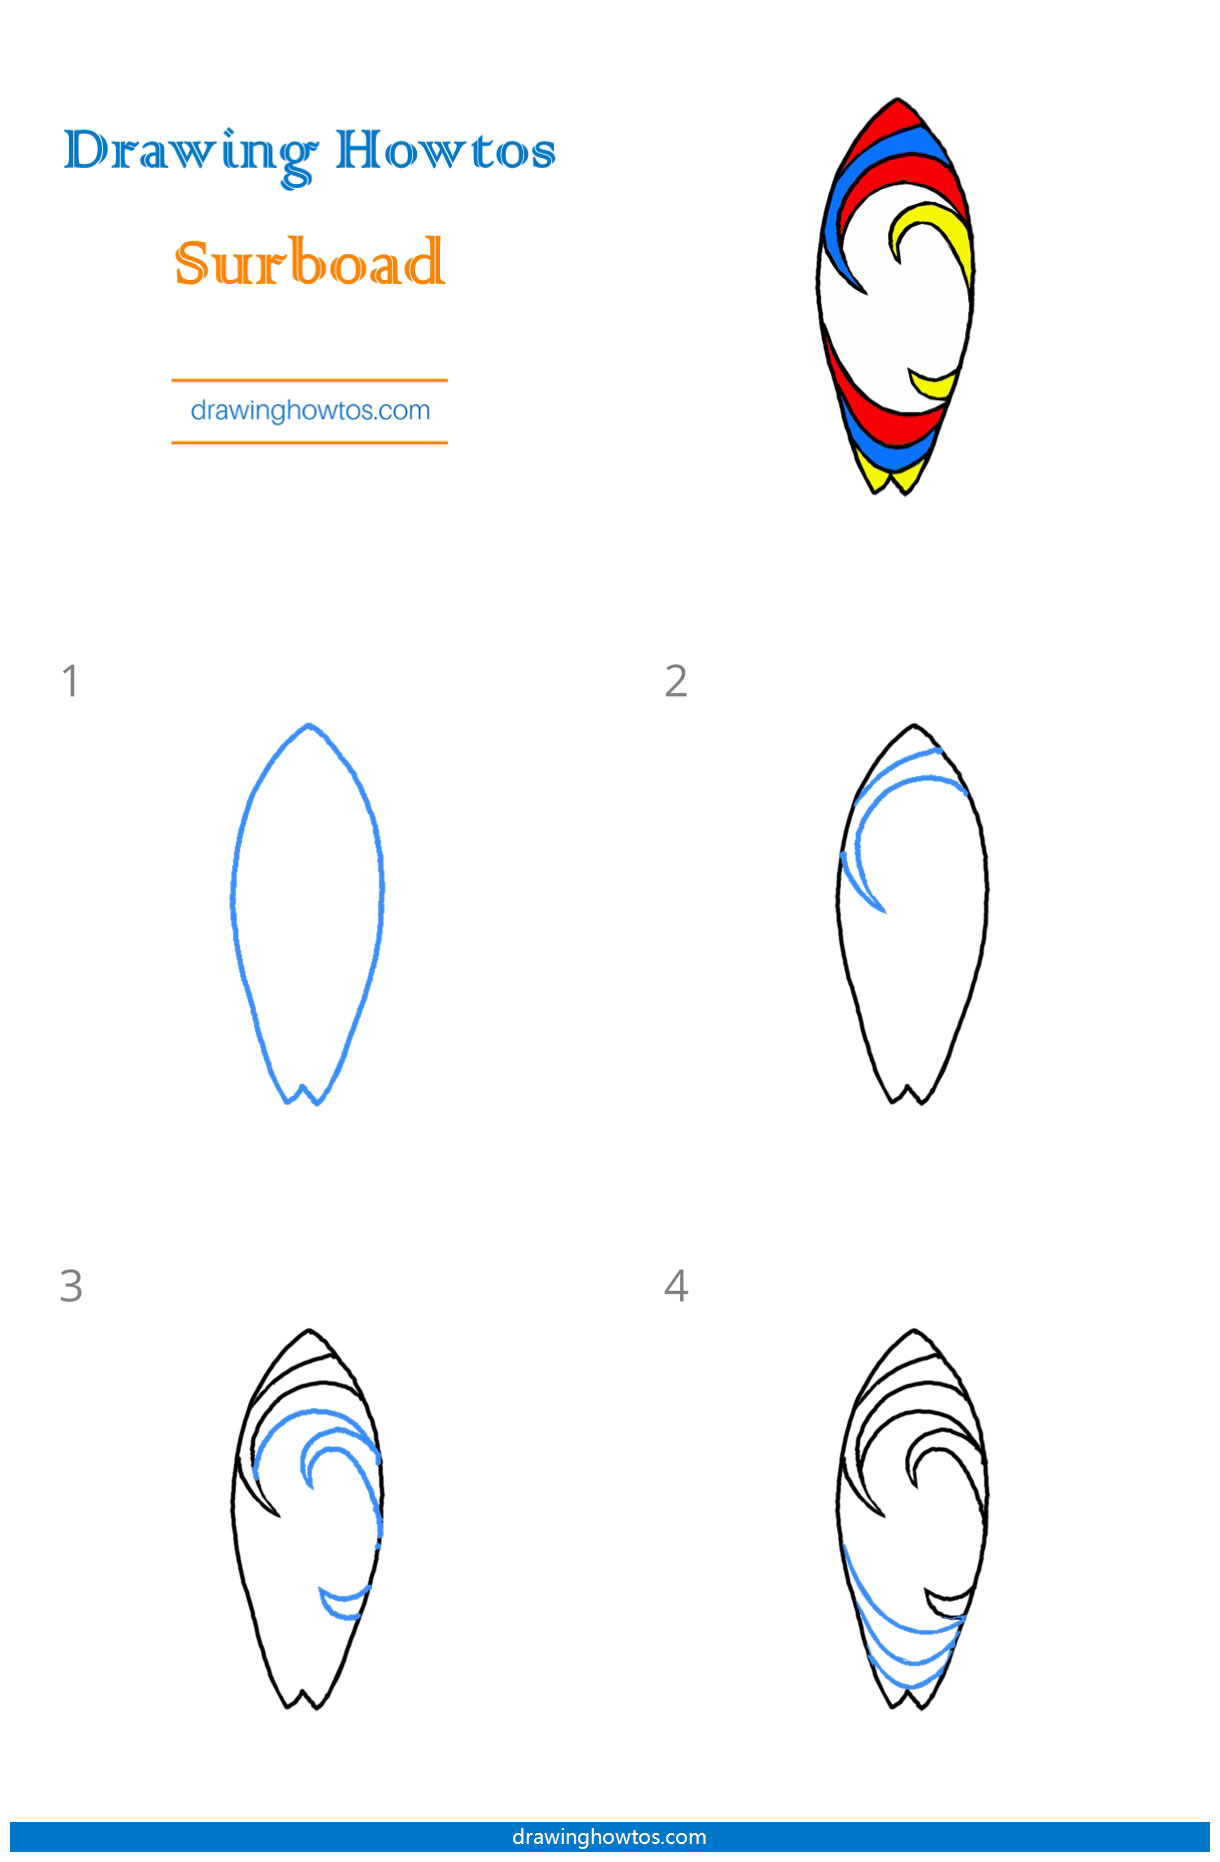 How to Draw a Surfboard Step by Step